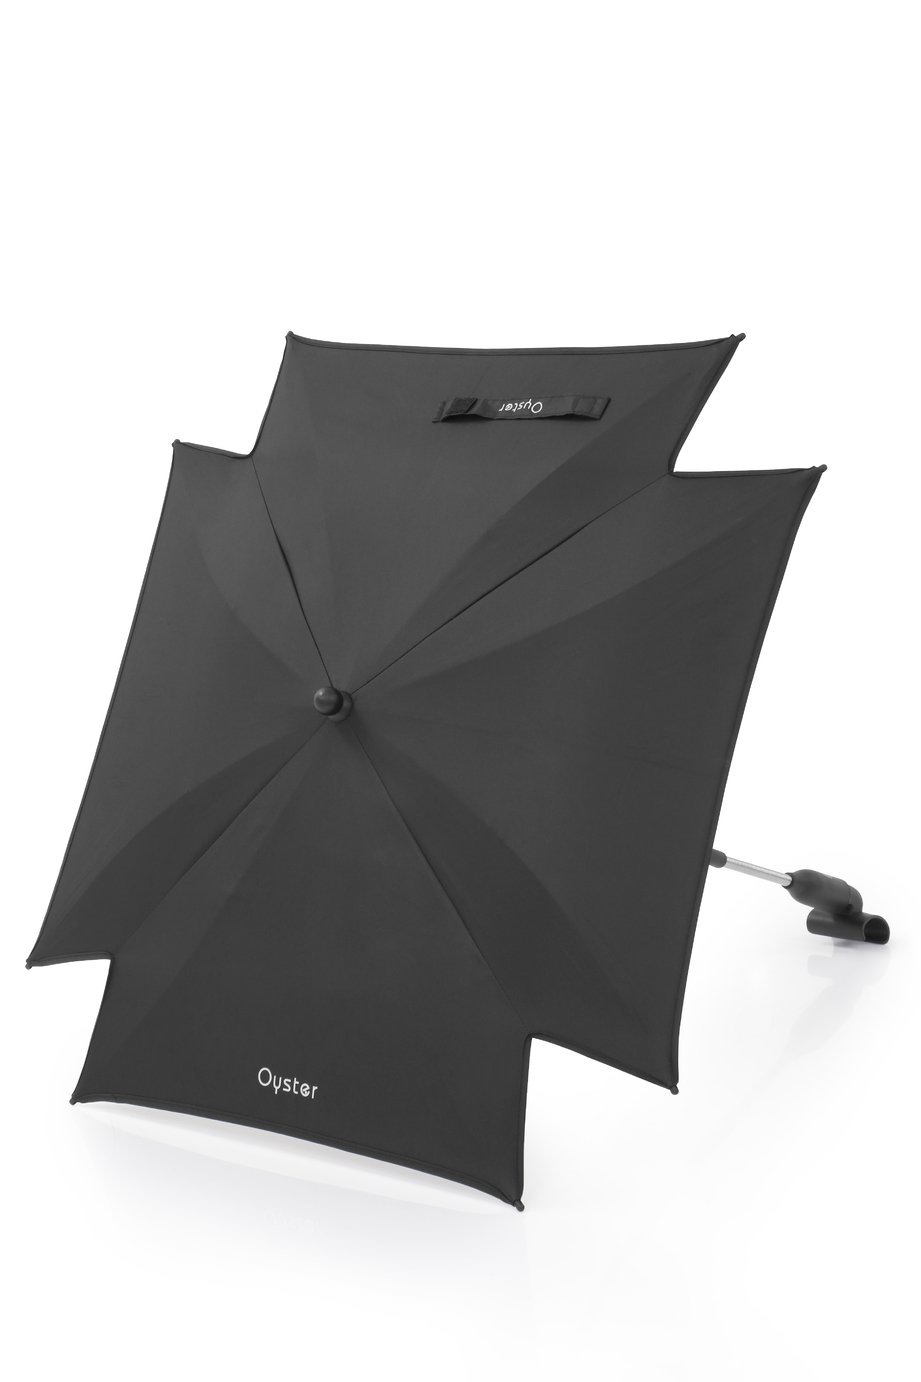 Oyster 3 Parasol Review